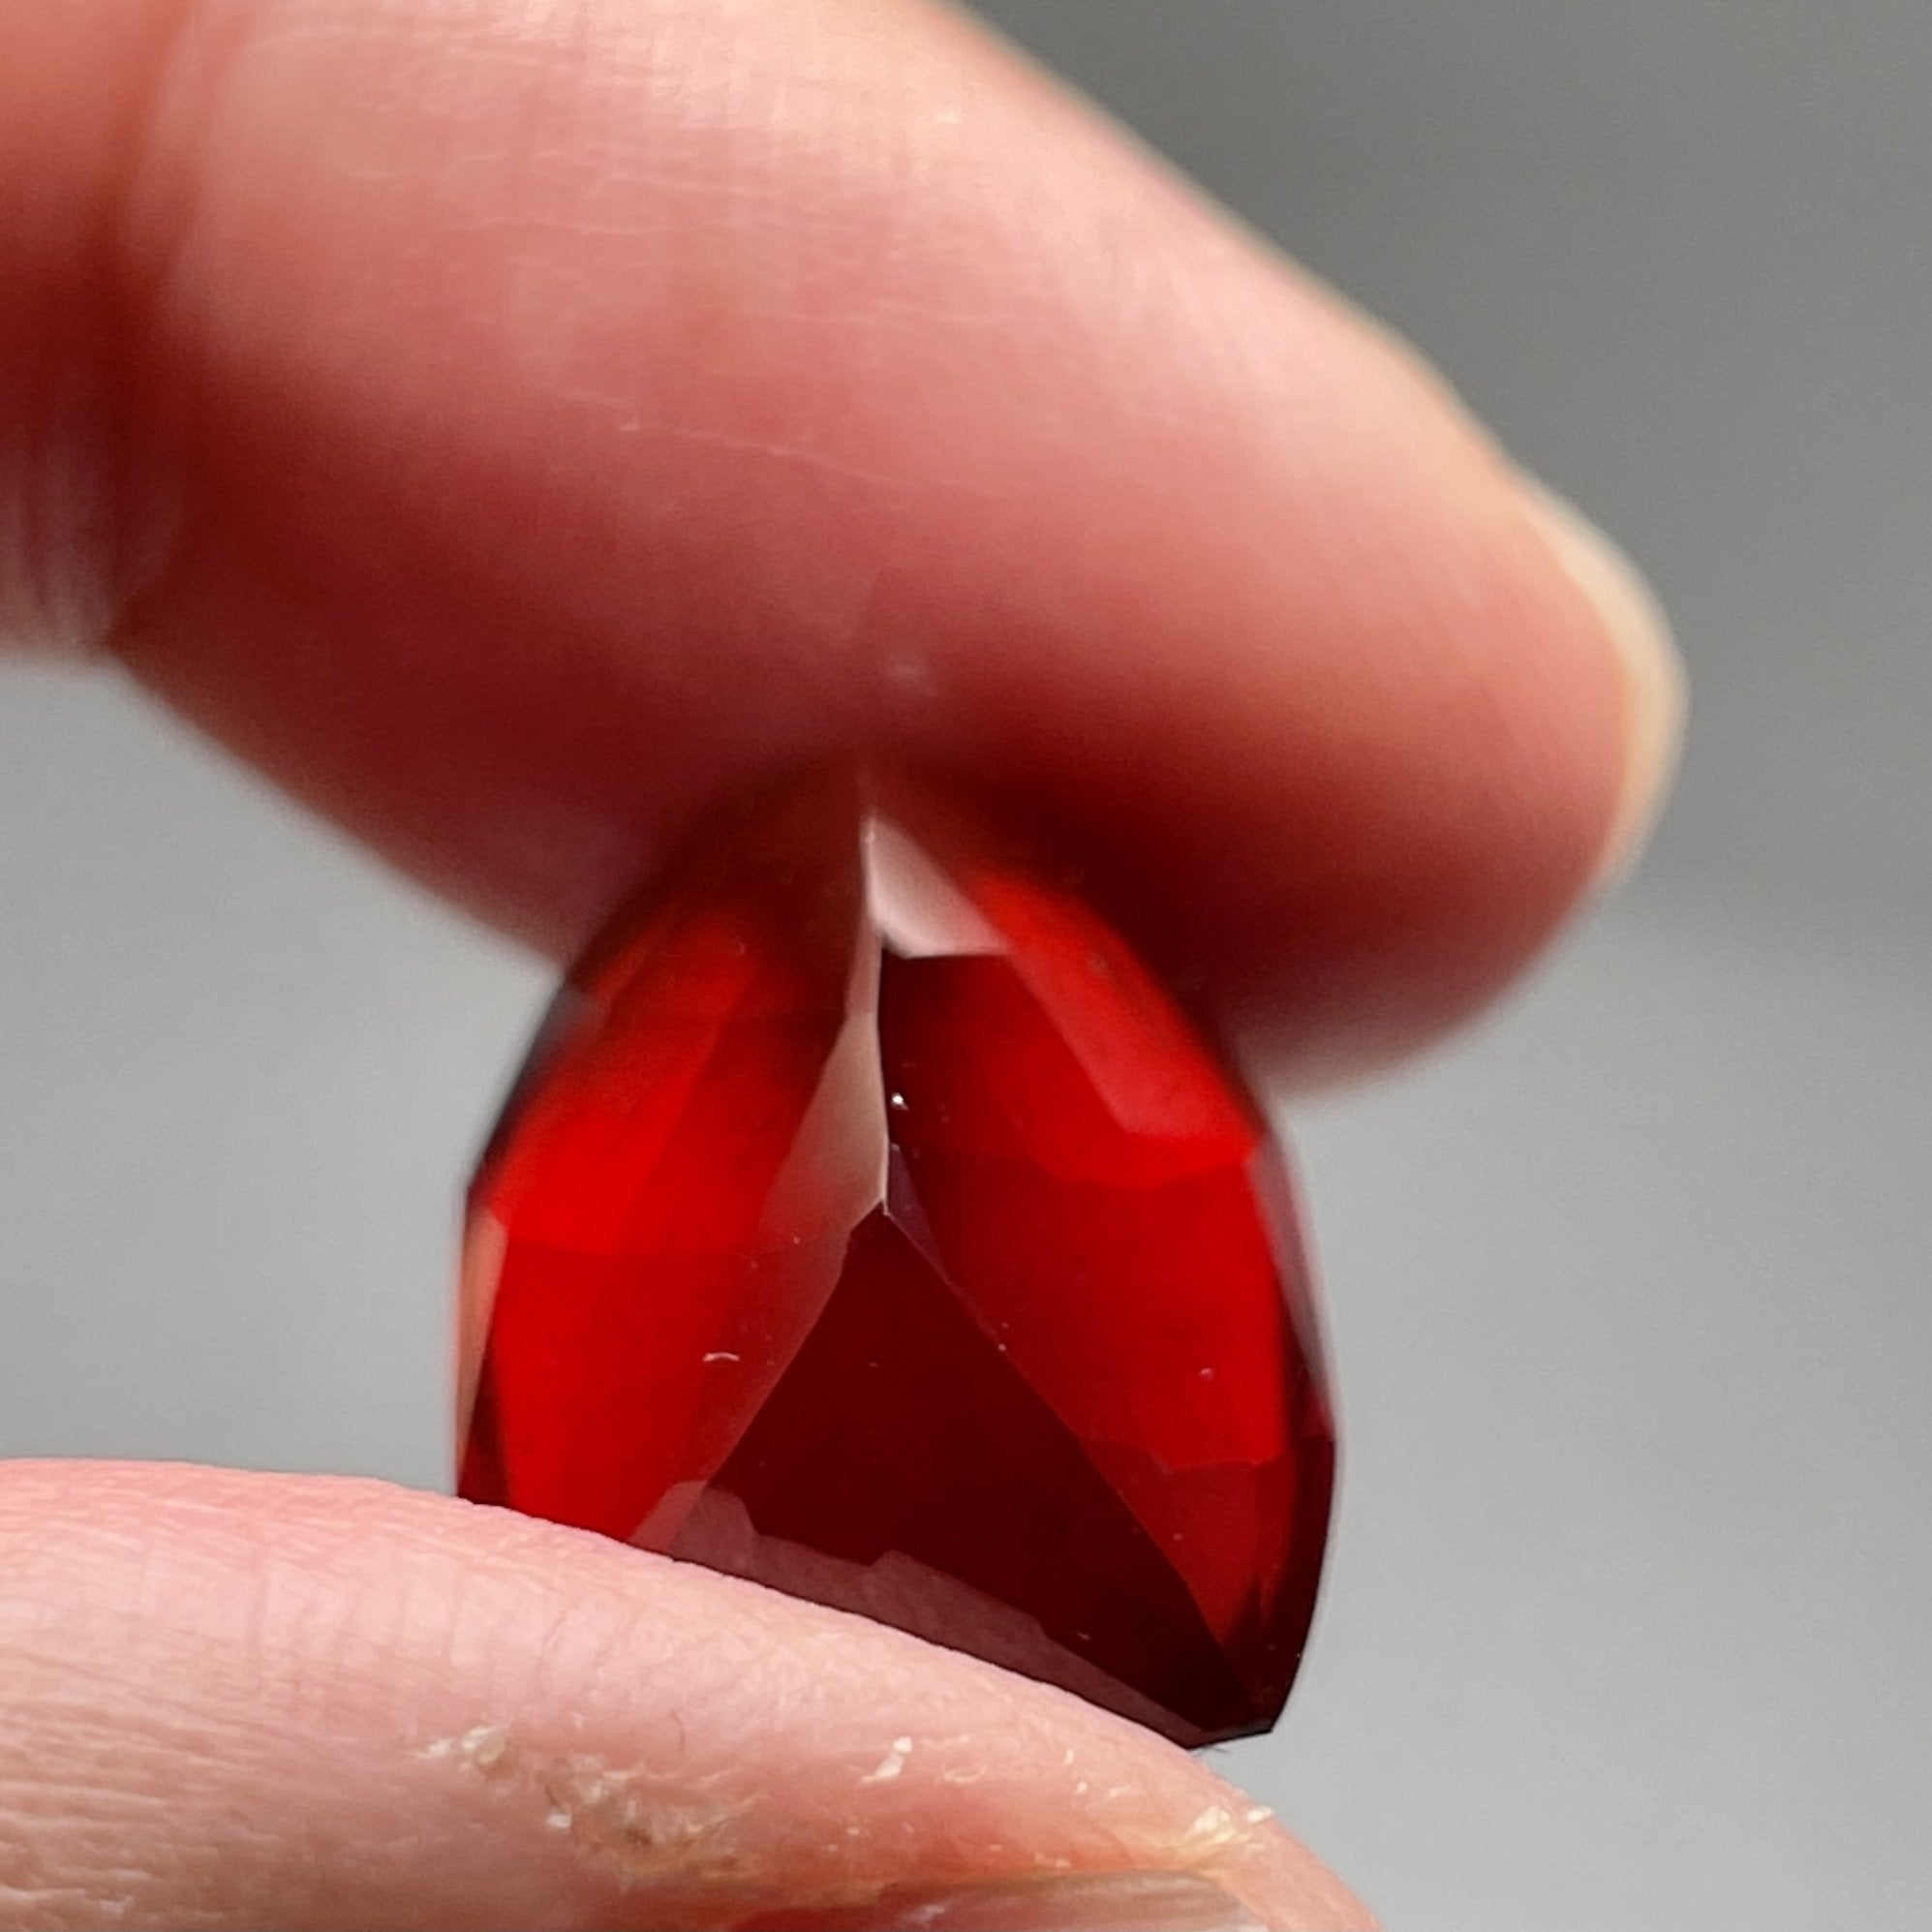 23.80Ct Hessonite Garnet Tanzania Untreated Unheated. 20 X 12.5 9 Mm. Use Either Side.